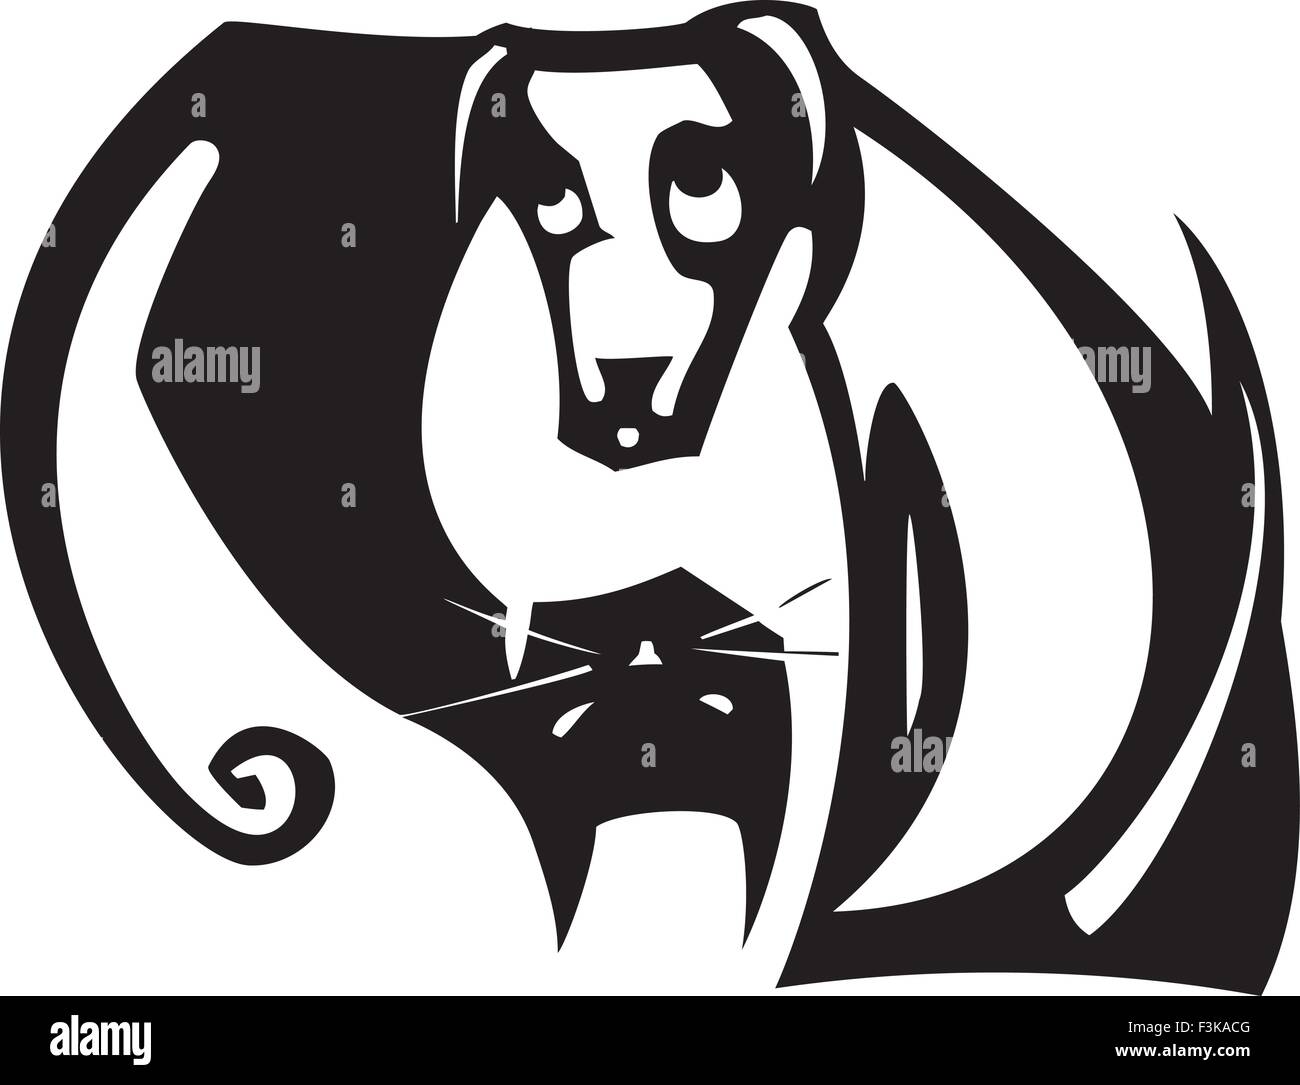 Simple yin yang balance image with a black cat and white dog Stock Vector